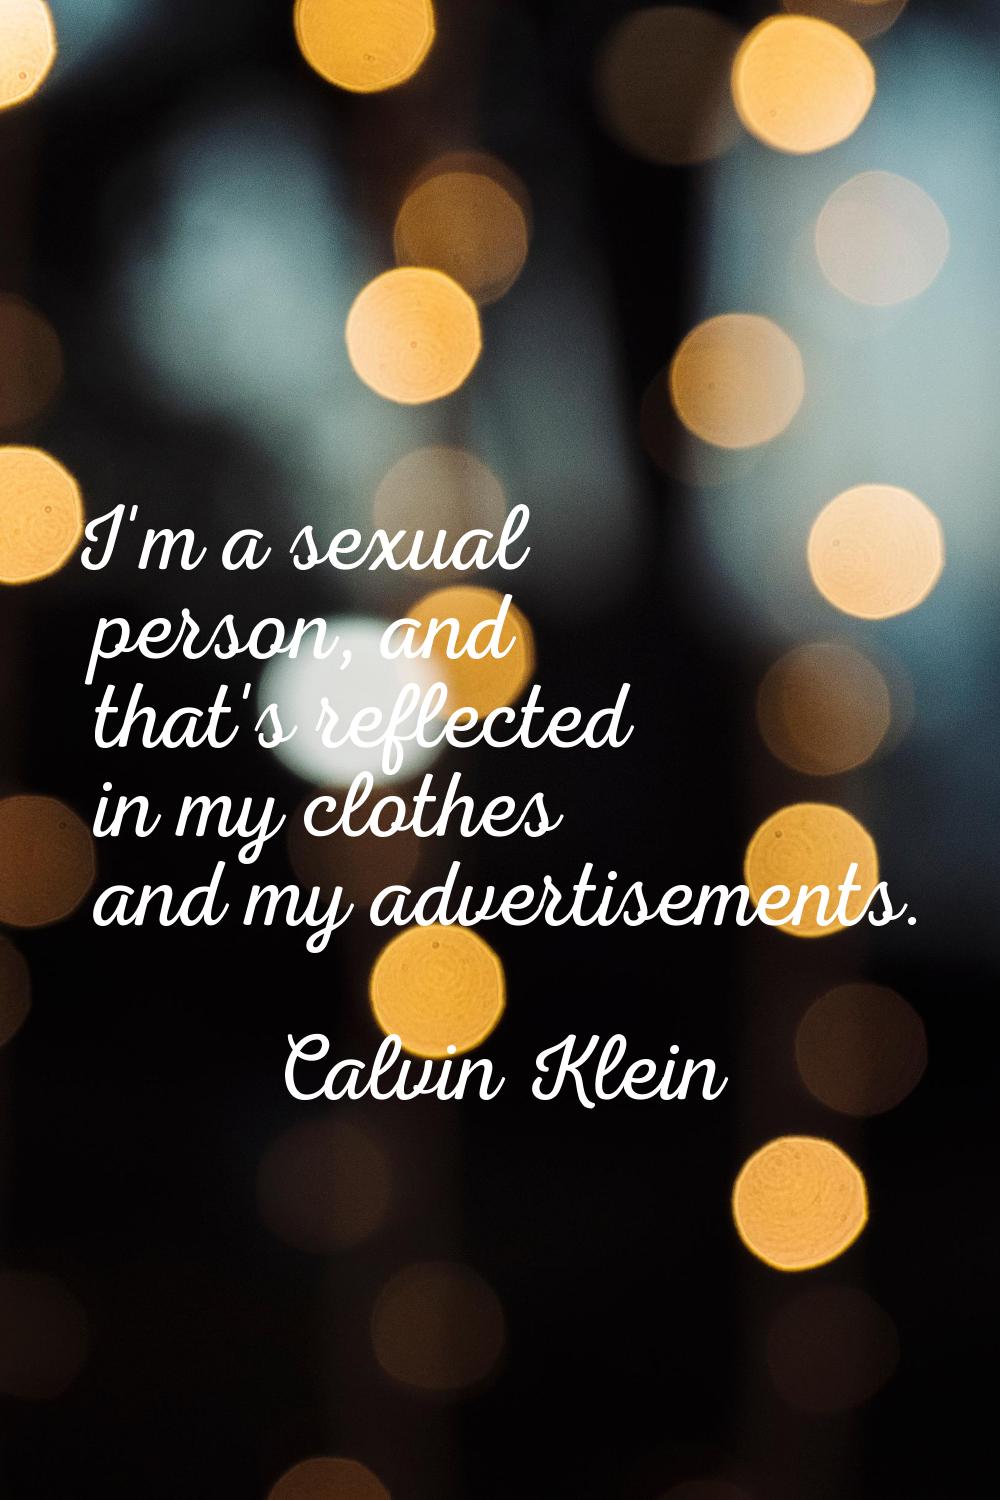 I'm a sexual person, and that's reflected in my clothes and my advertisements.